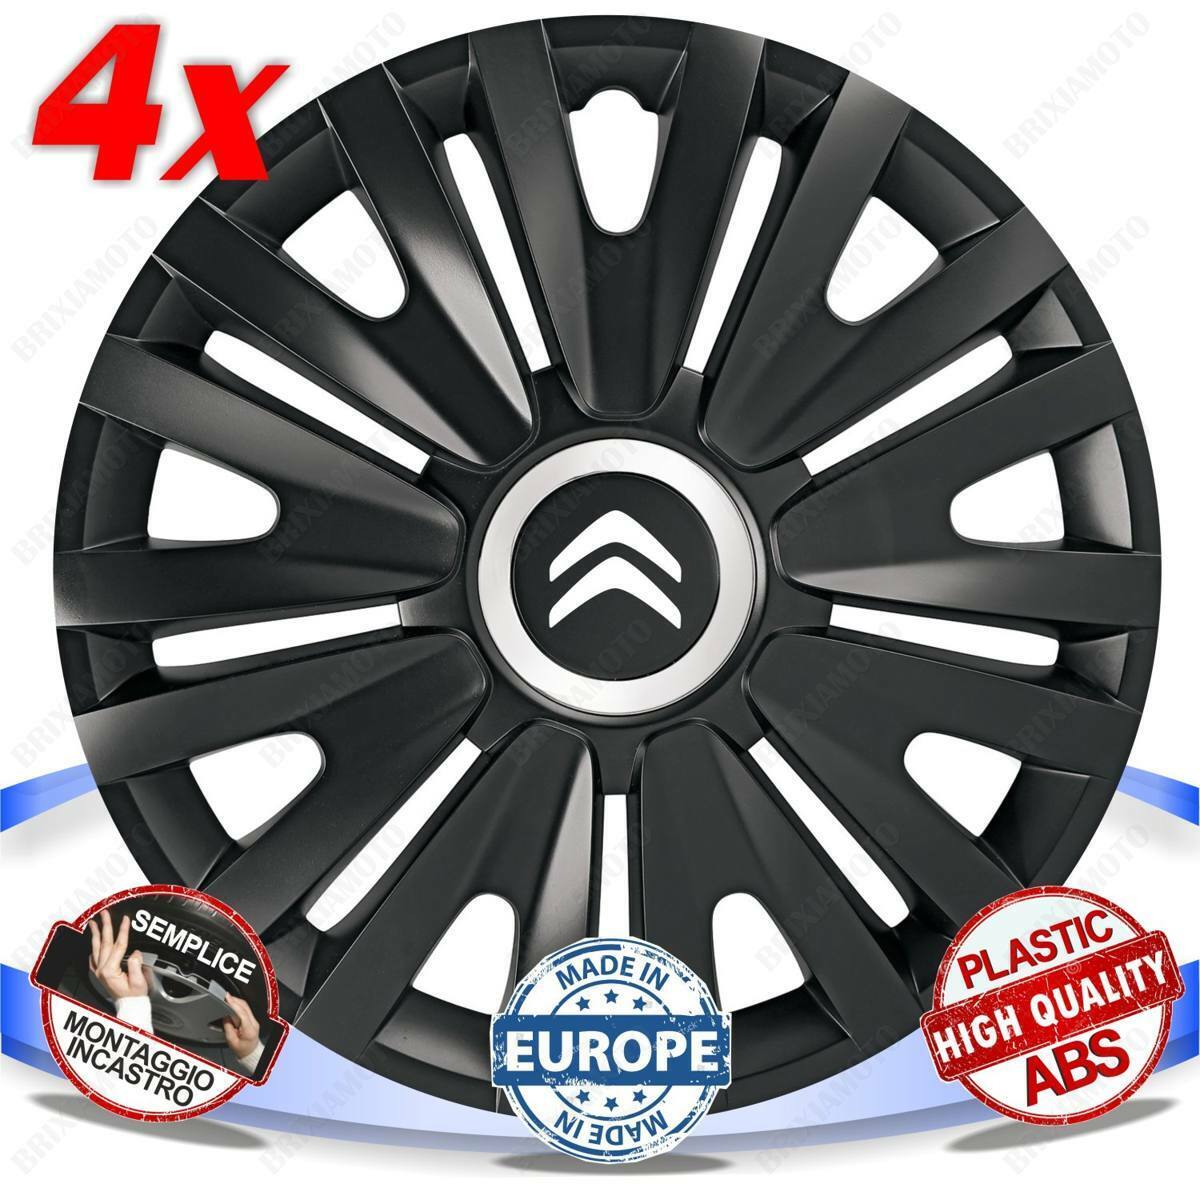 Set 4 Bolts Wheel Cover Wheels Caps Portland Mall C Black Popular shop is the lowest price challenge for Royal Citroen 16